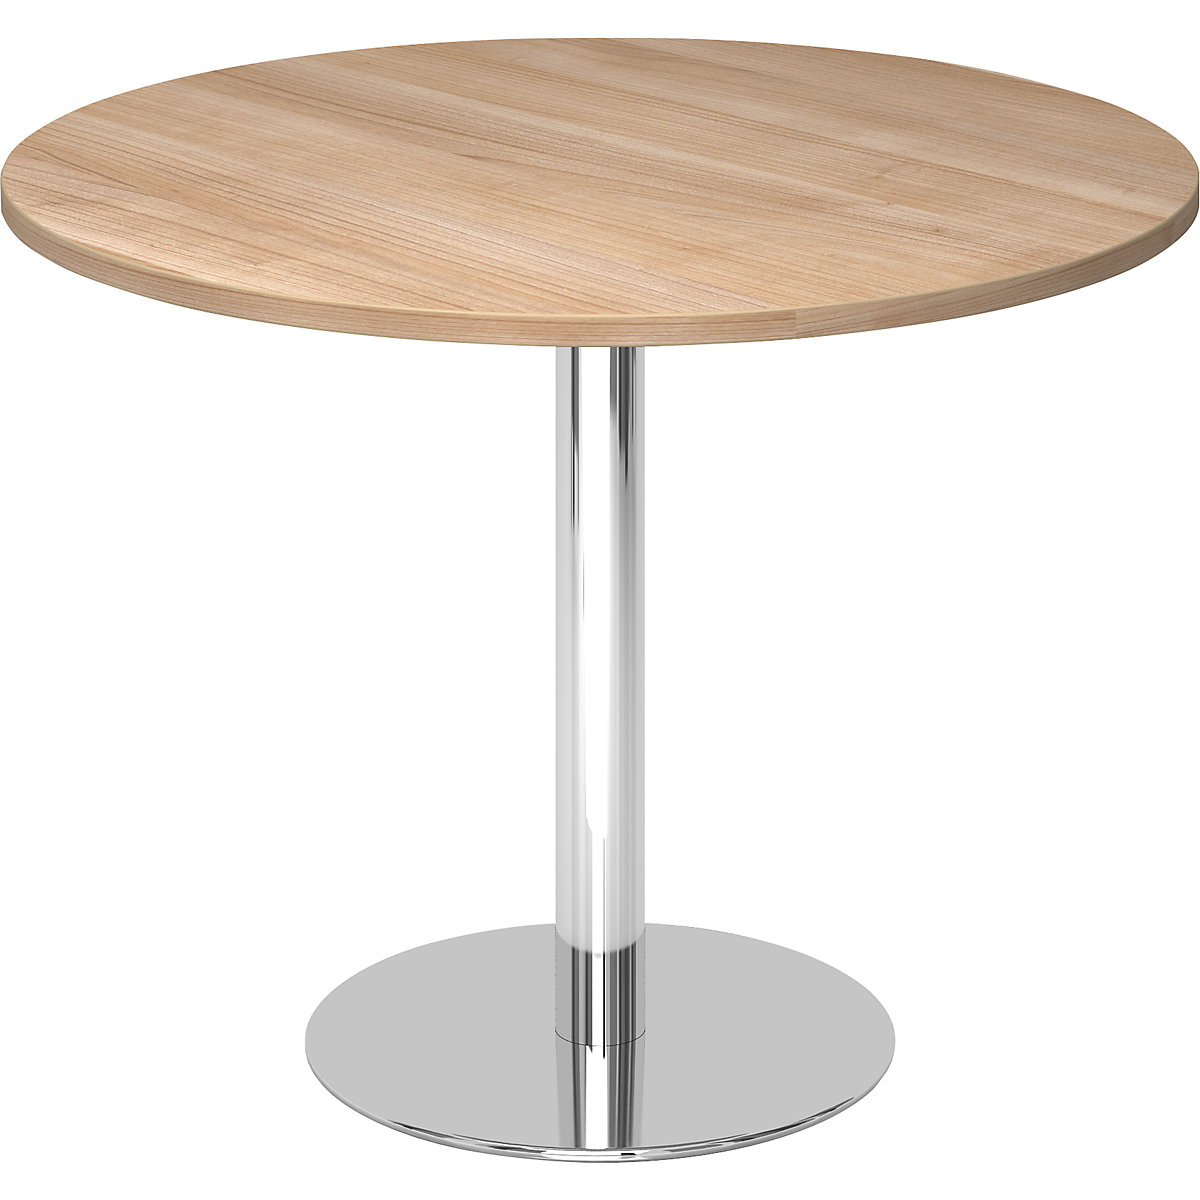 Conference table, Ø 1000 mm, 755 mm high, chrome plated frame, tabletop in walnut finish-7